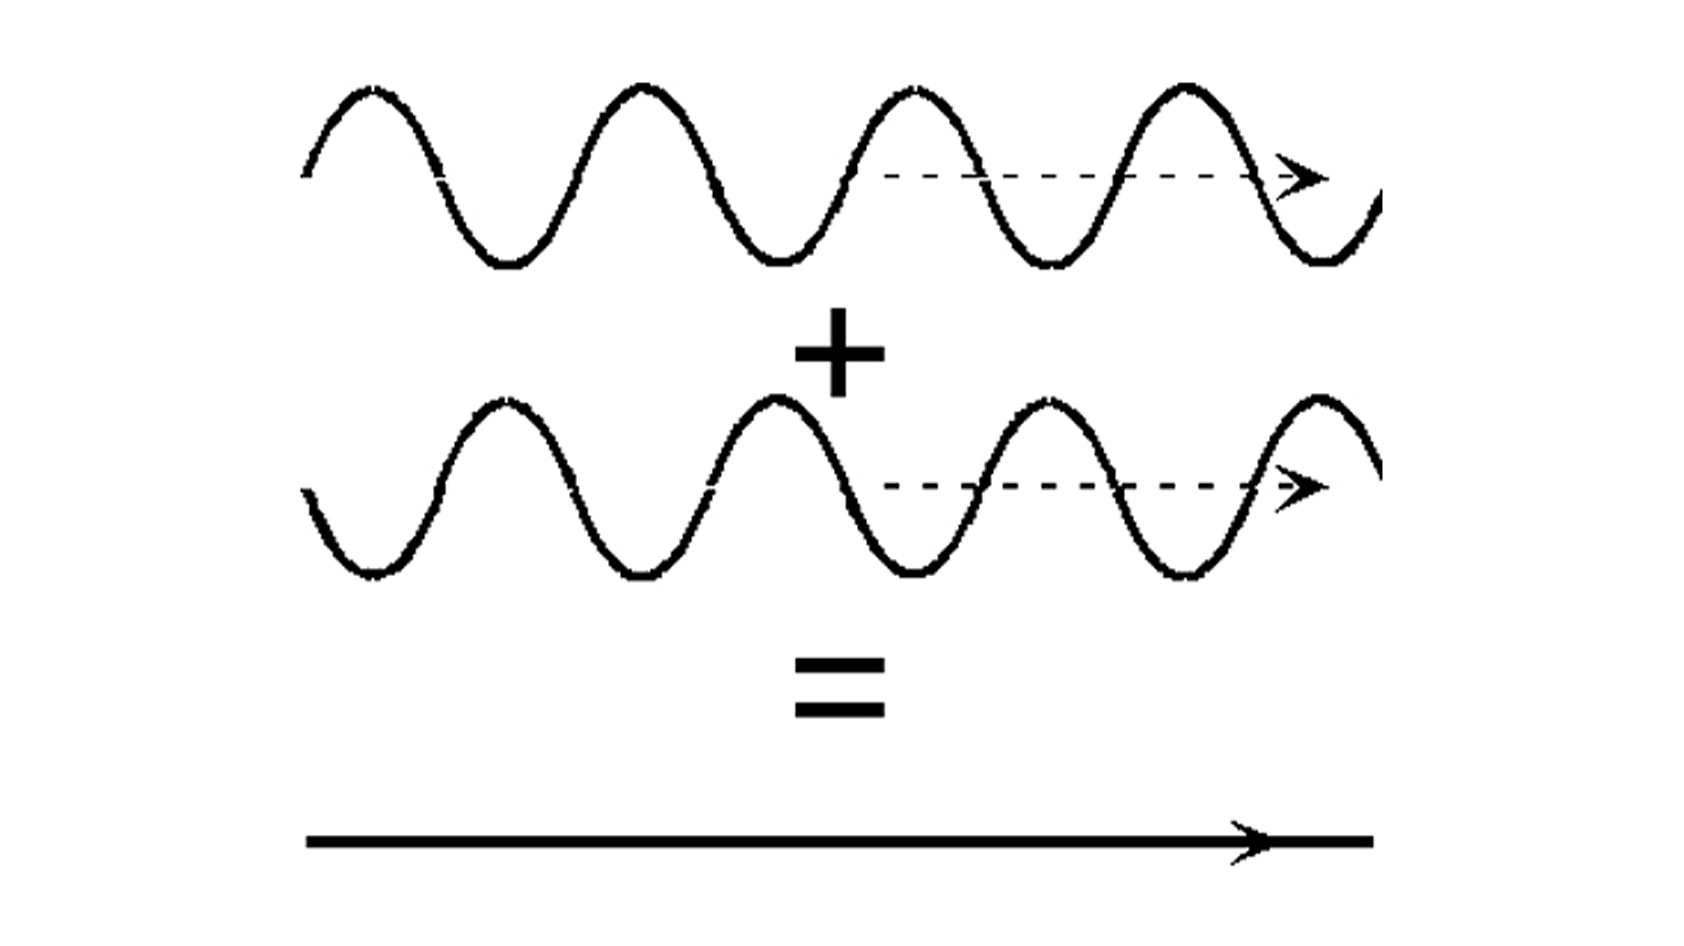 A chart depicts how an out-of-phase wave can cancel out background noise for ANC headphones.